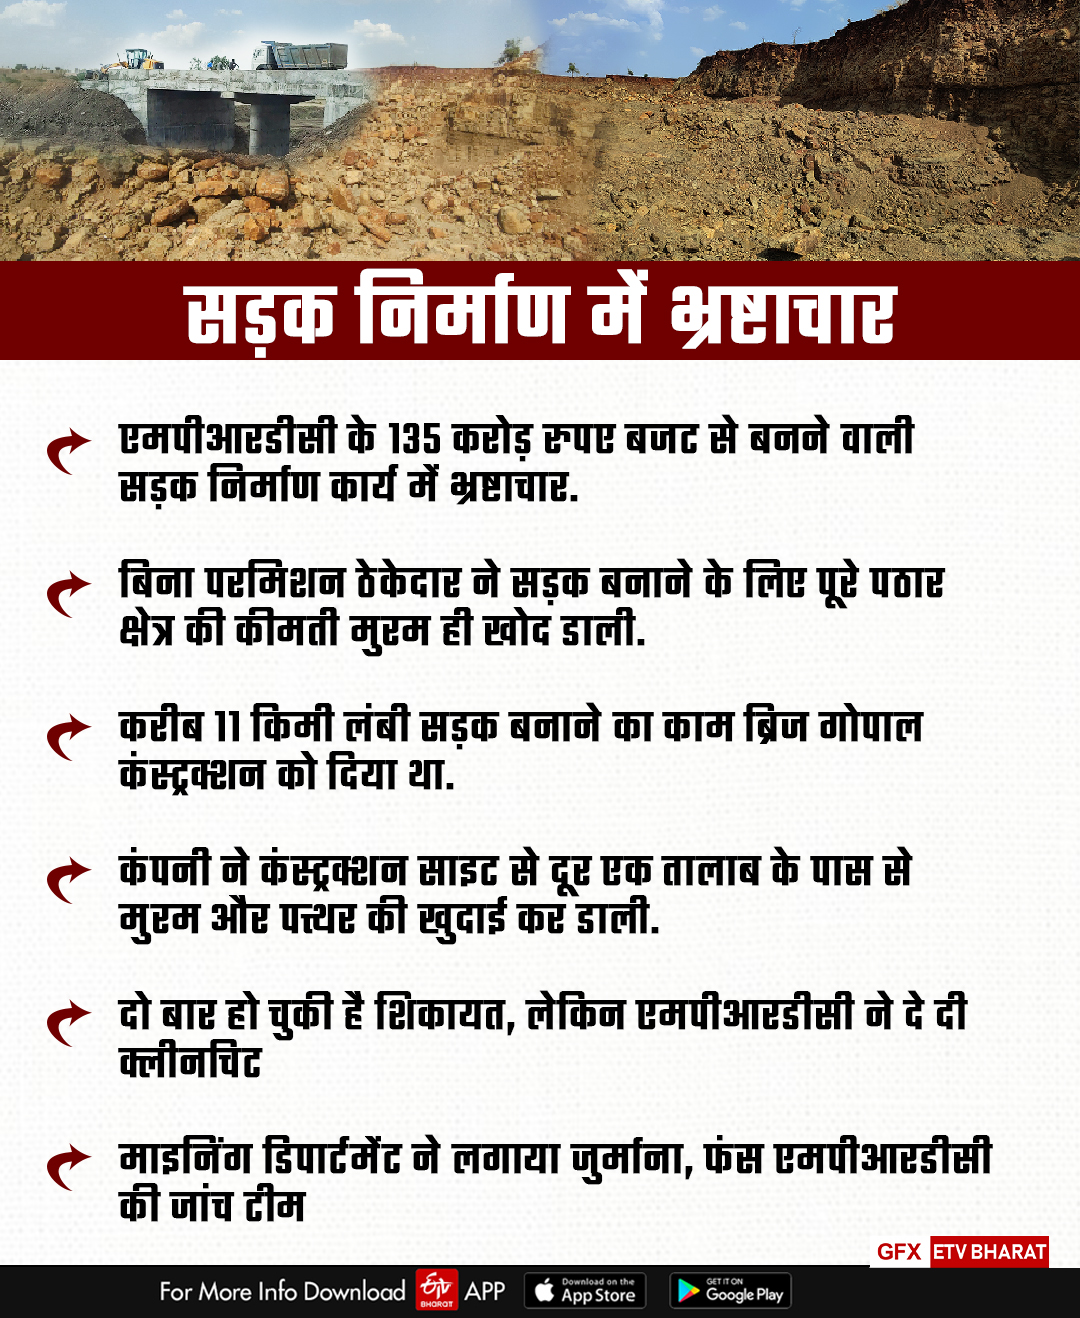 Corruption in road construction in Bhopal